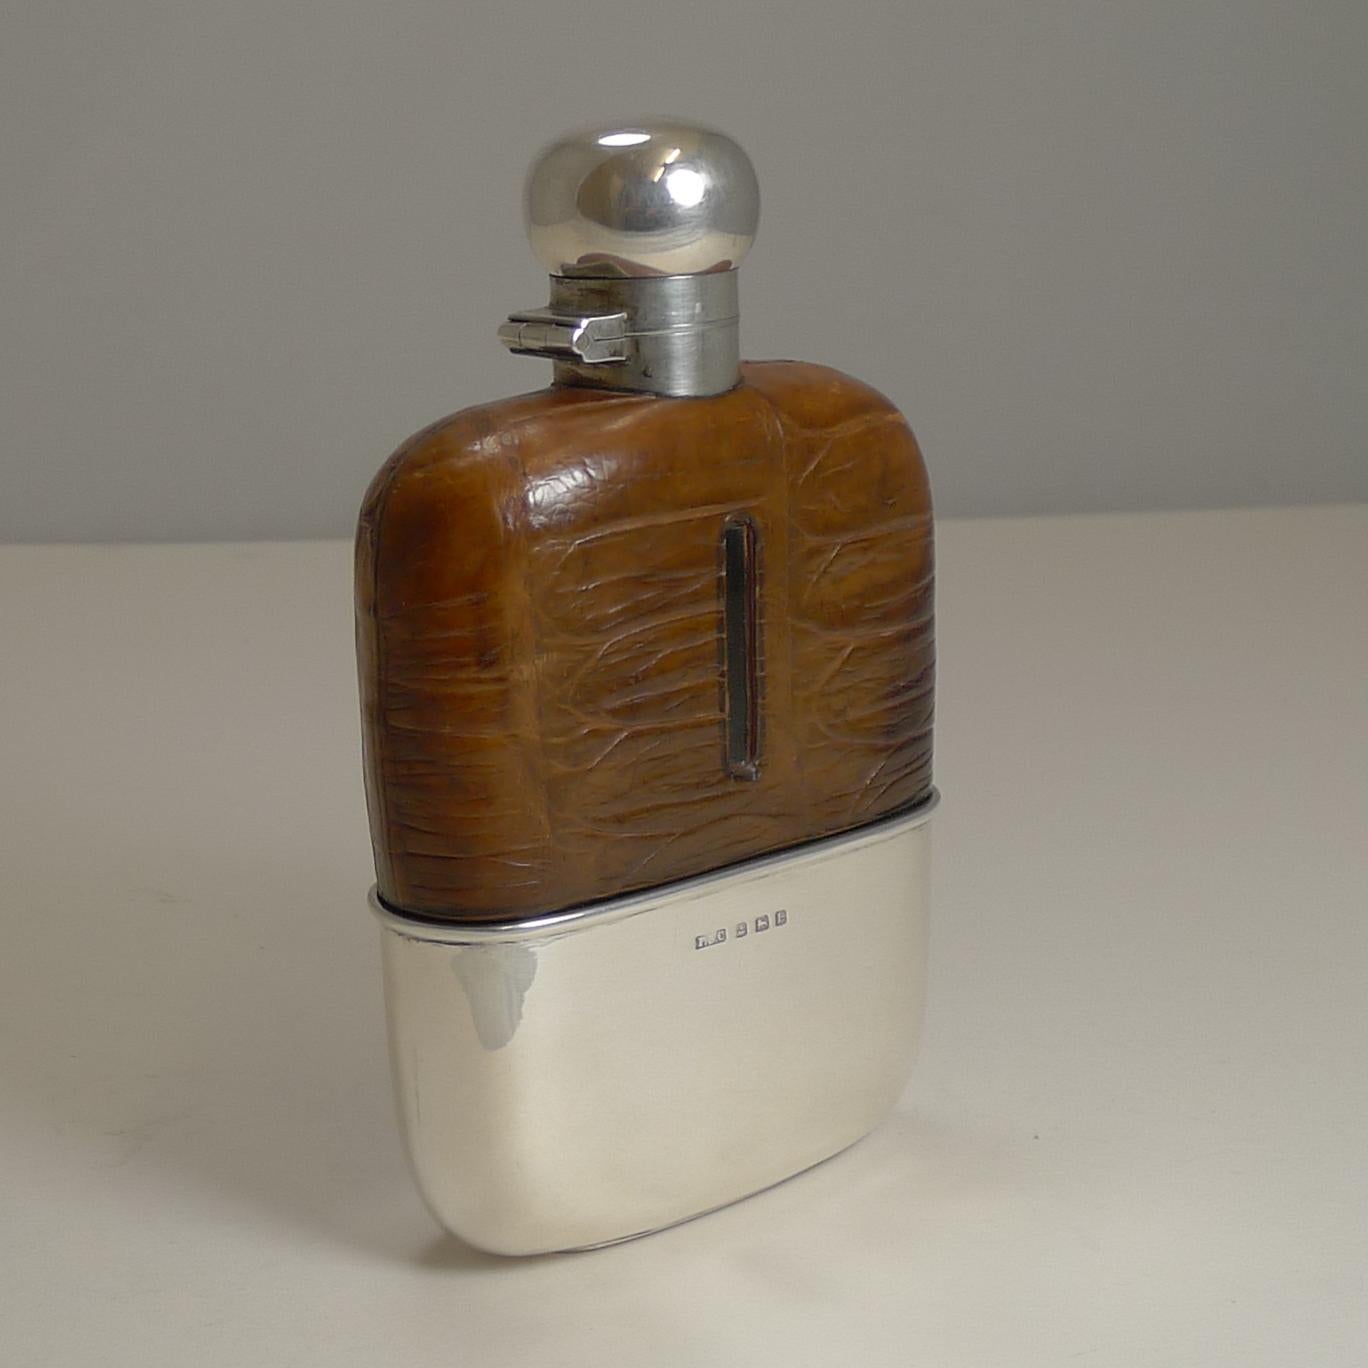 A handsome English sterling silver hip or liquor flask made from sterling silver and the upper half wrapped in Crocodile skin with a lovely cognac color with a good patina.

The collar and hinged lid are made from sterling silver as is the